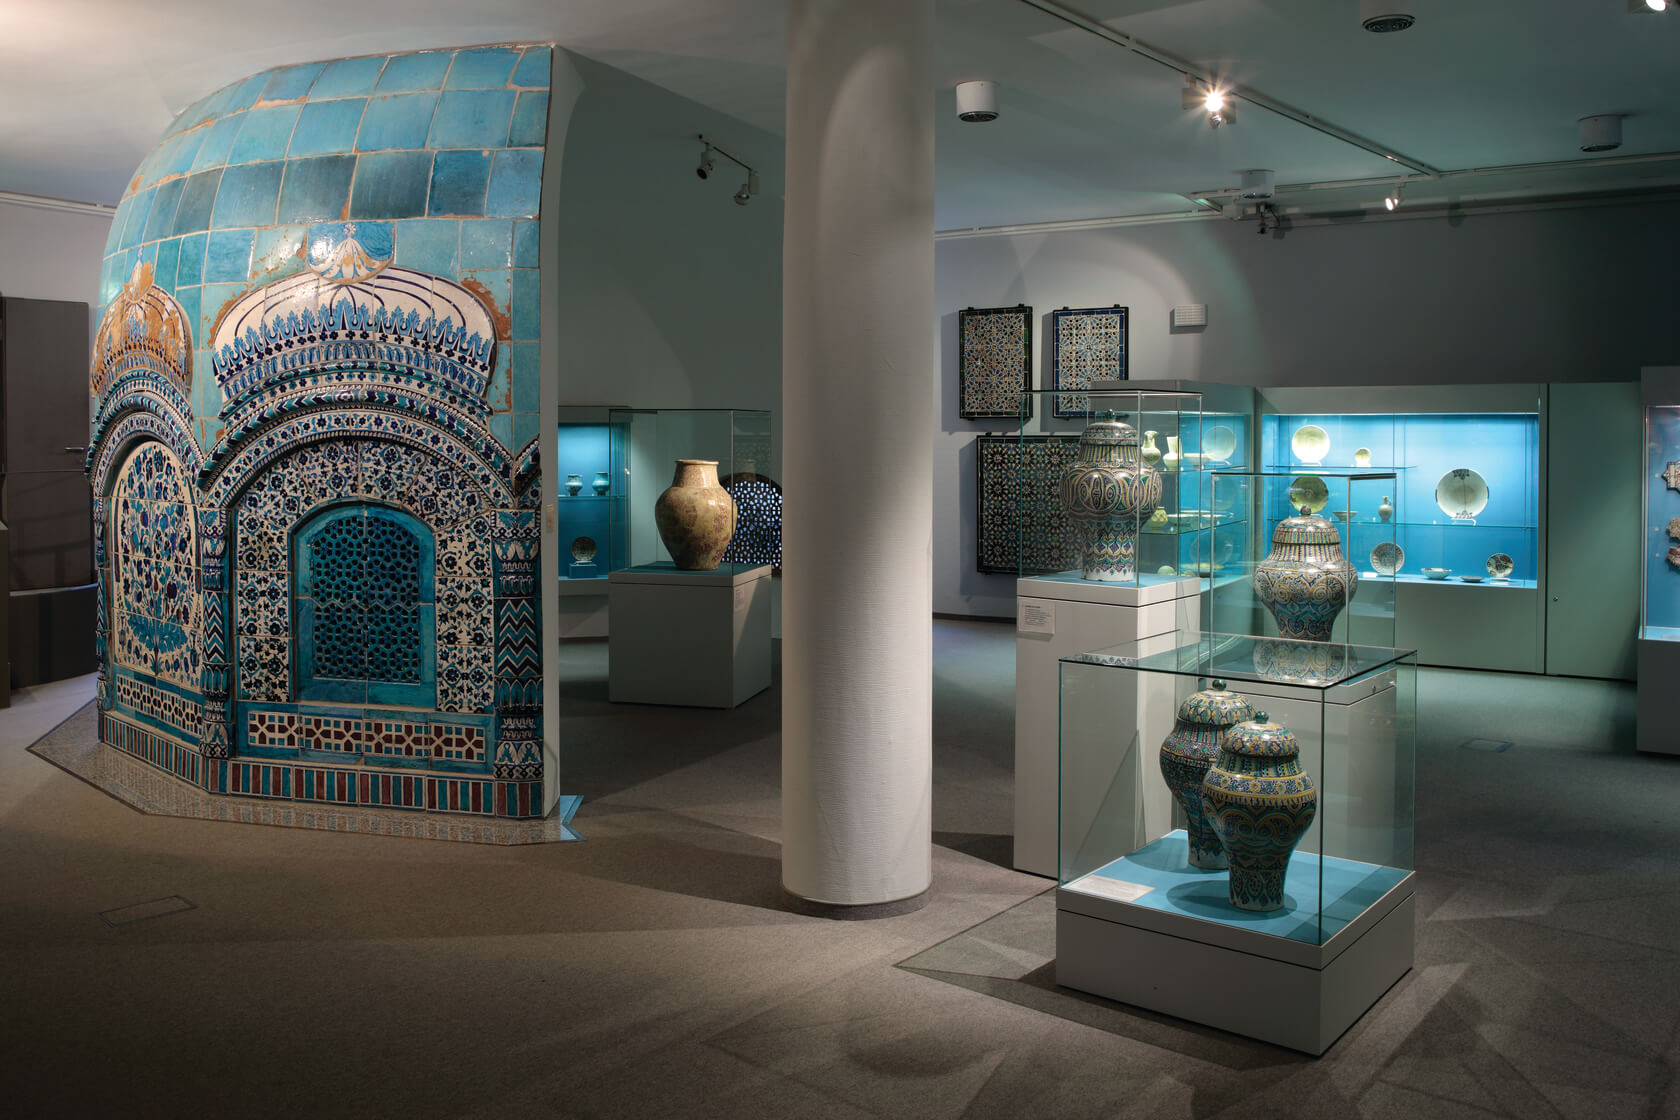 A museum showing ancient pottery and tile work